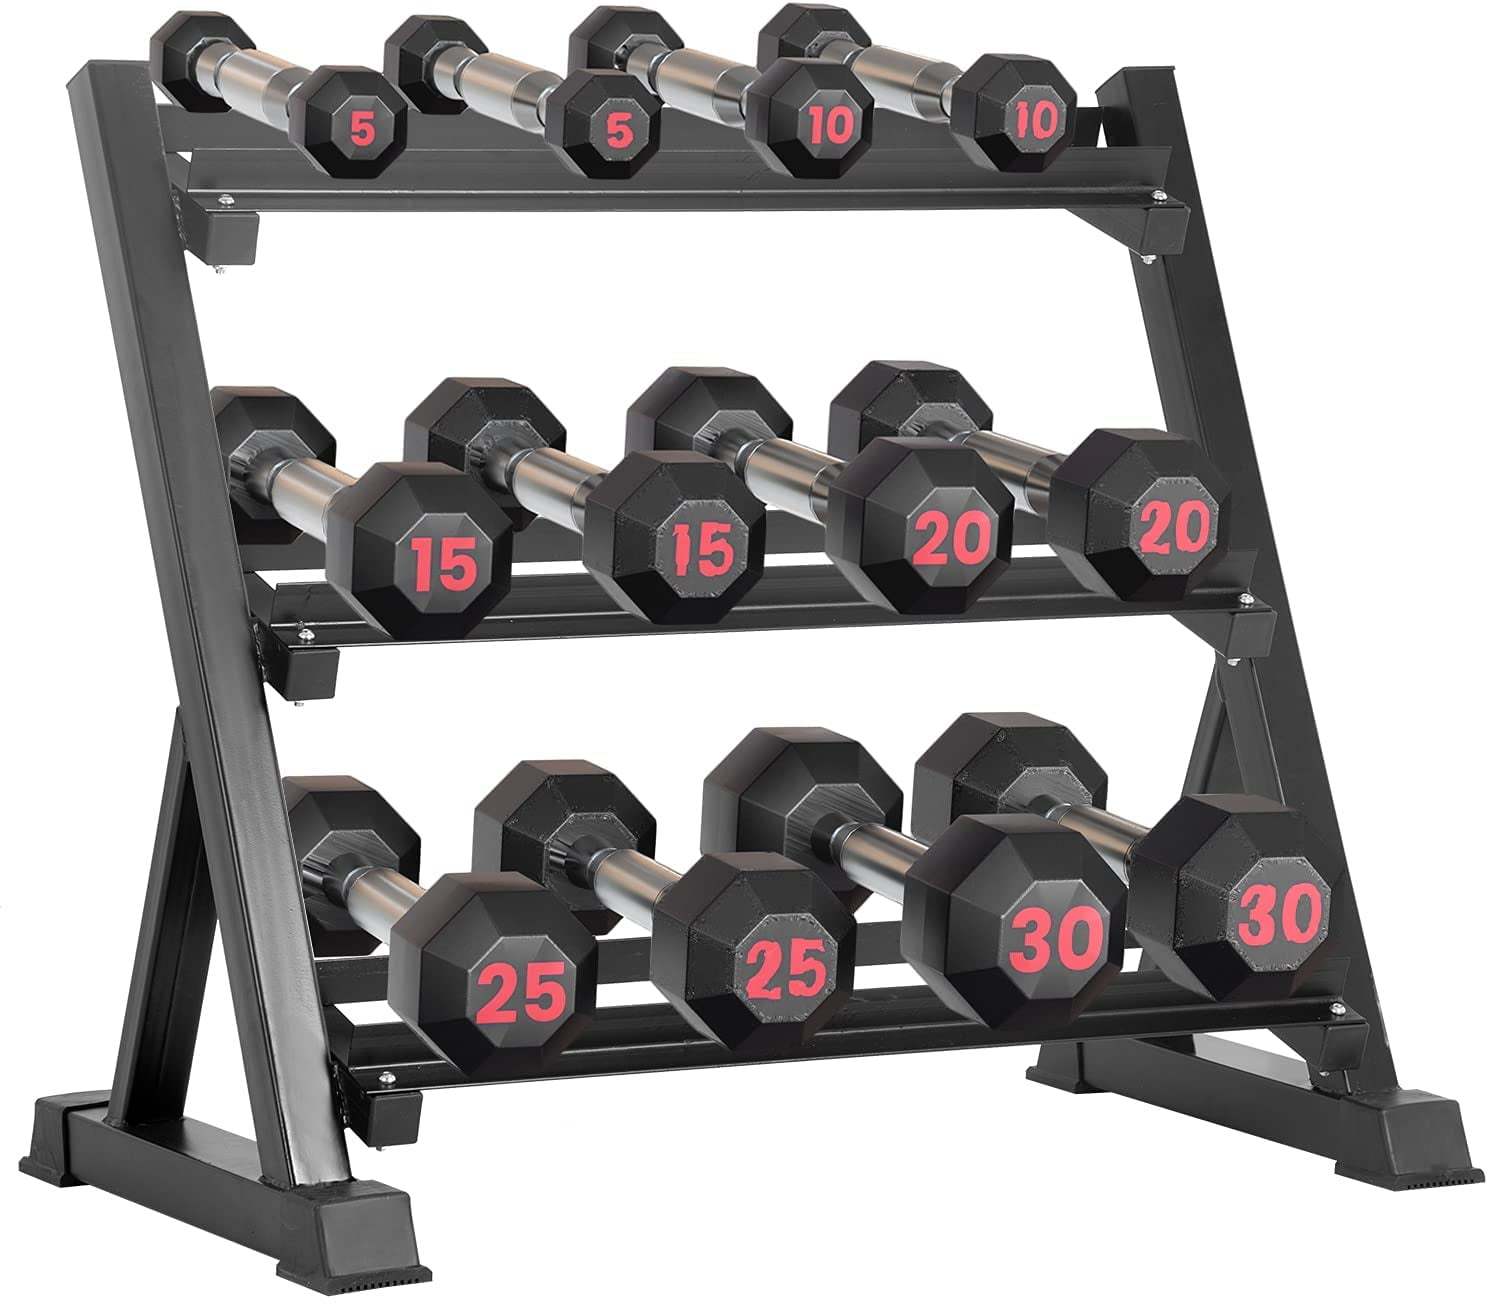 10 Lbs or Less Peyan Dumbbell Rack Stand Weight Lifting Dumbbell Tree Rack Stands Floor Bracket for Home Gym Organization 5 Tier Dumbbells Storage Rack 